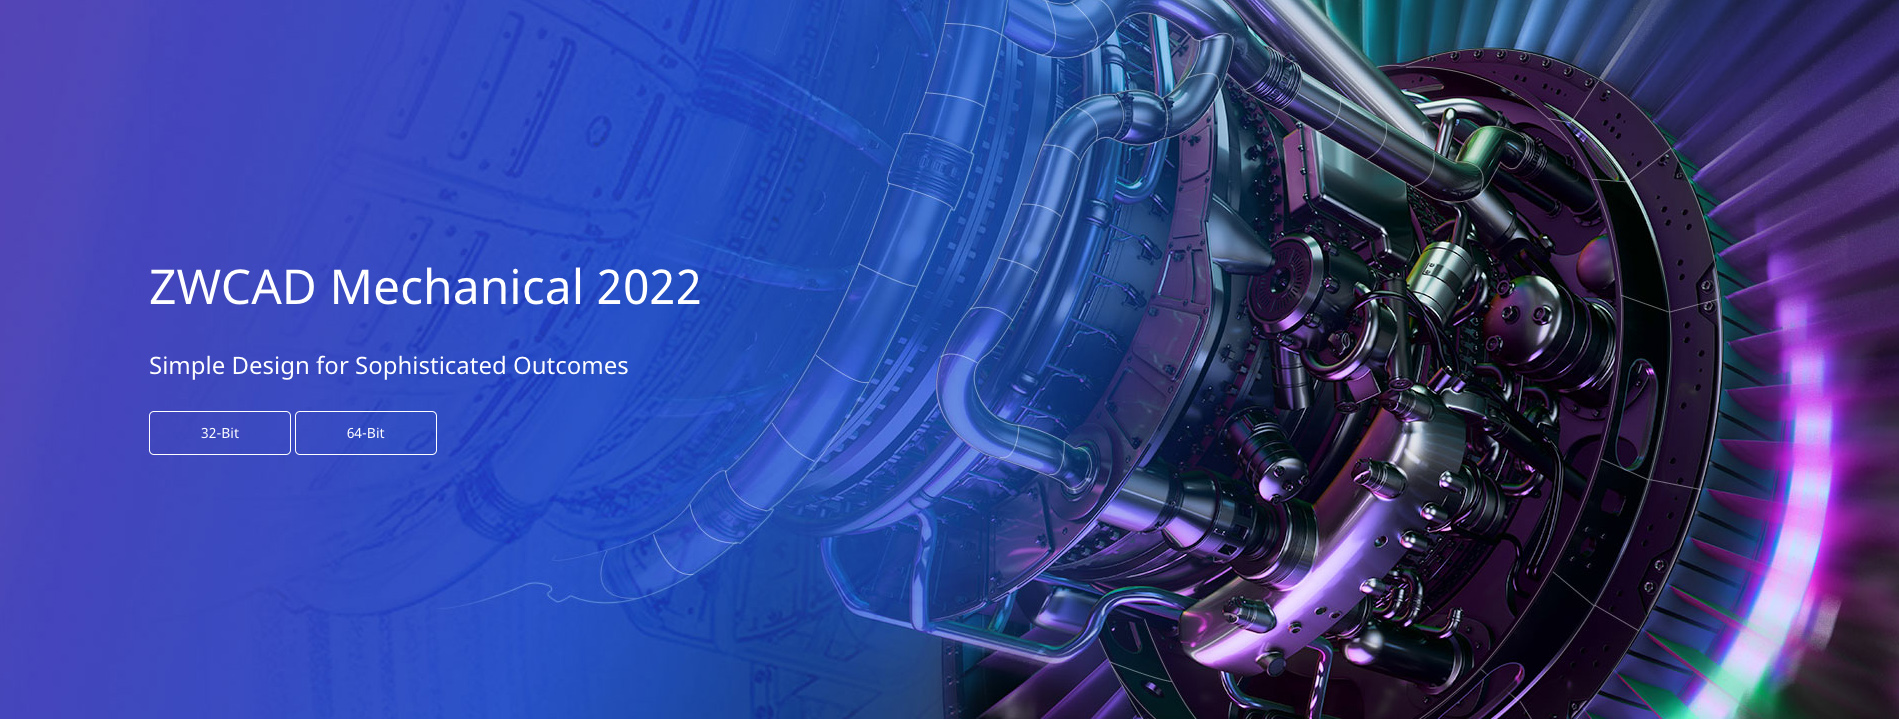 ZWCAD Mechanical 2021: Simple Design for Sophisticated Outcomes